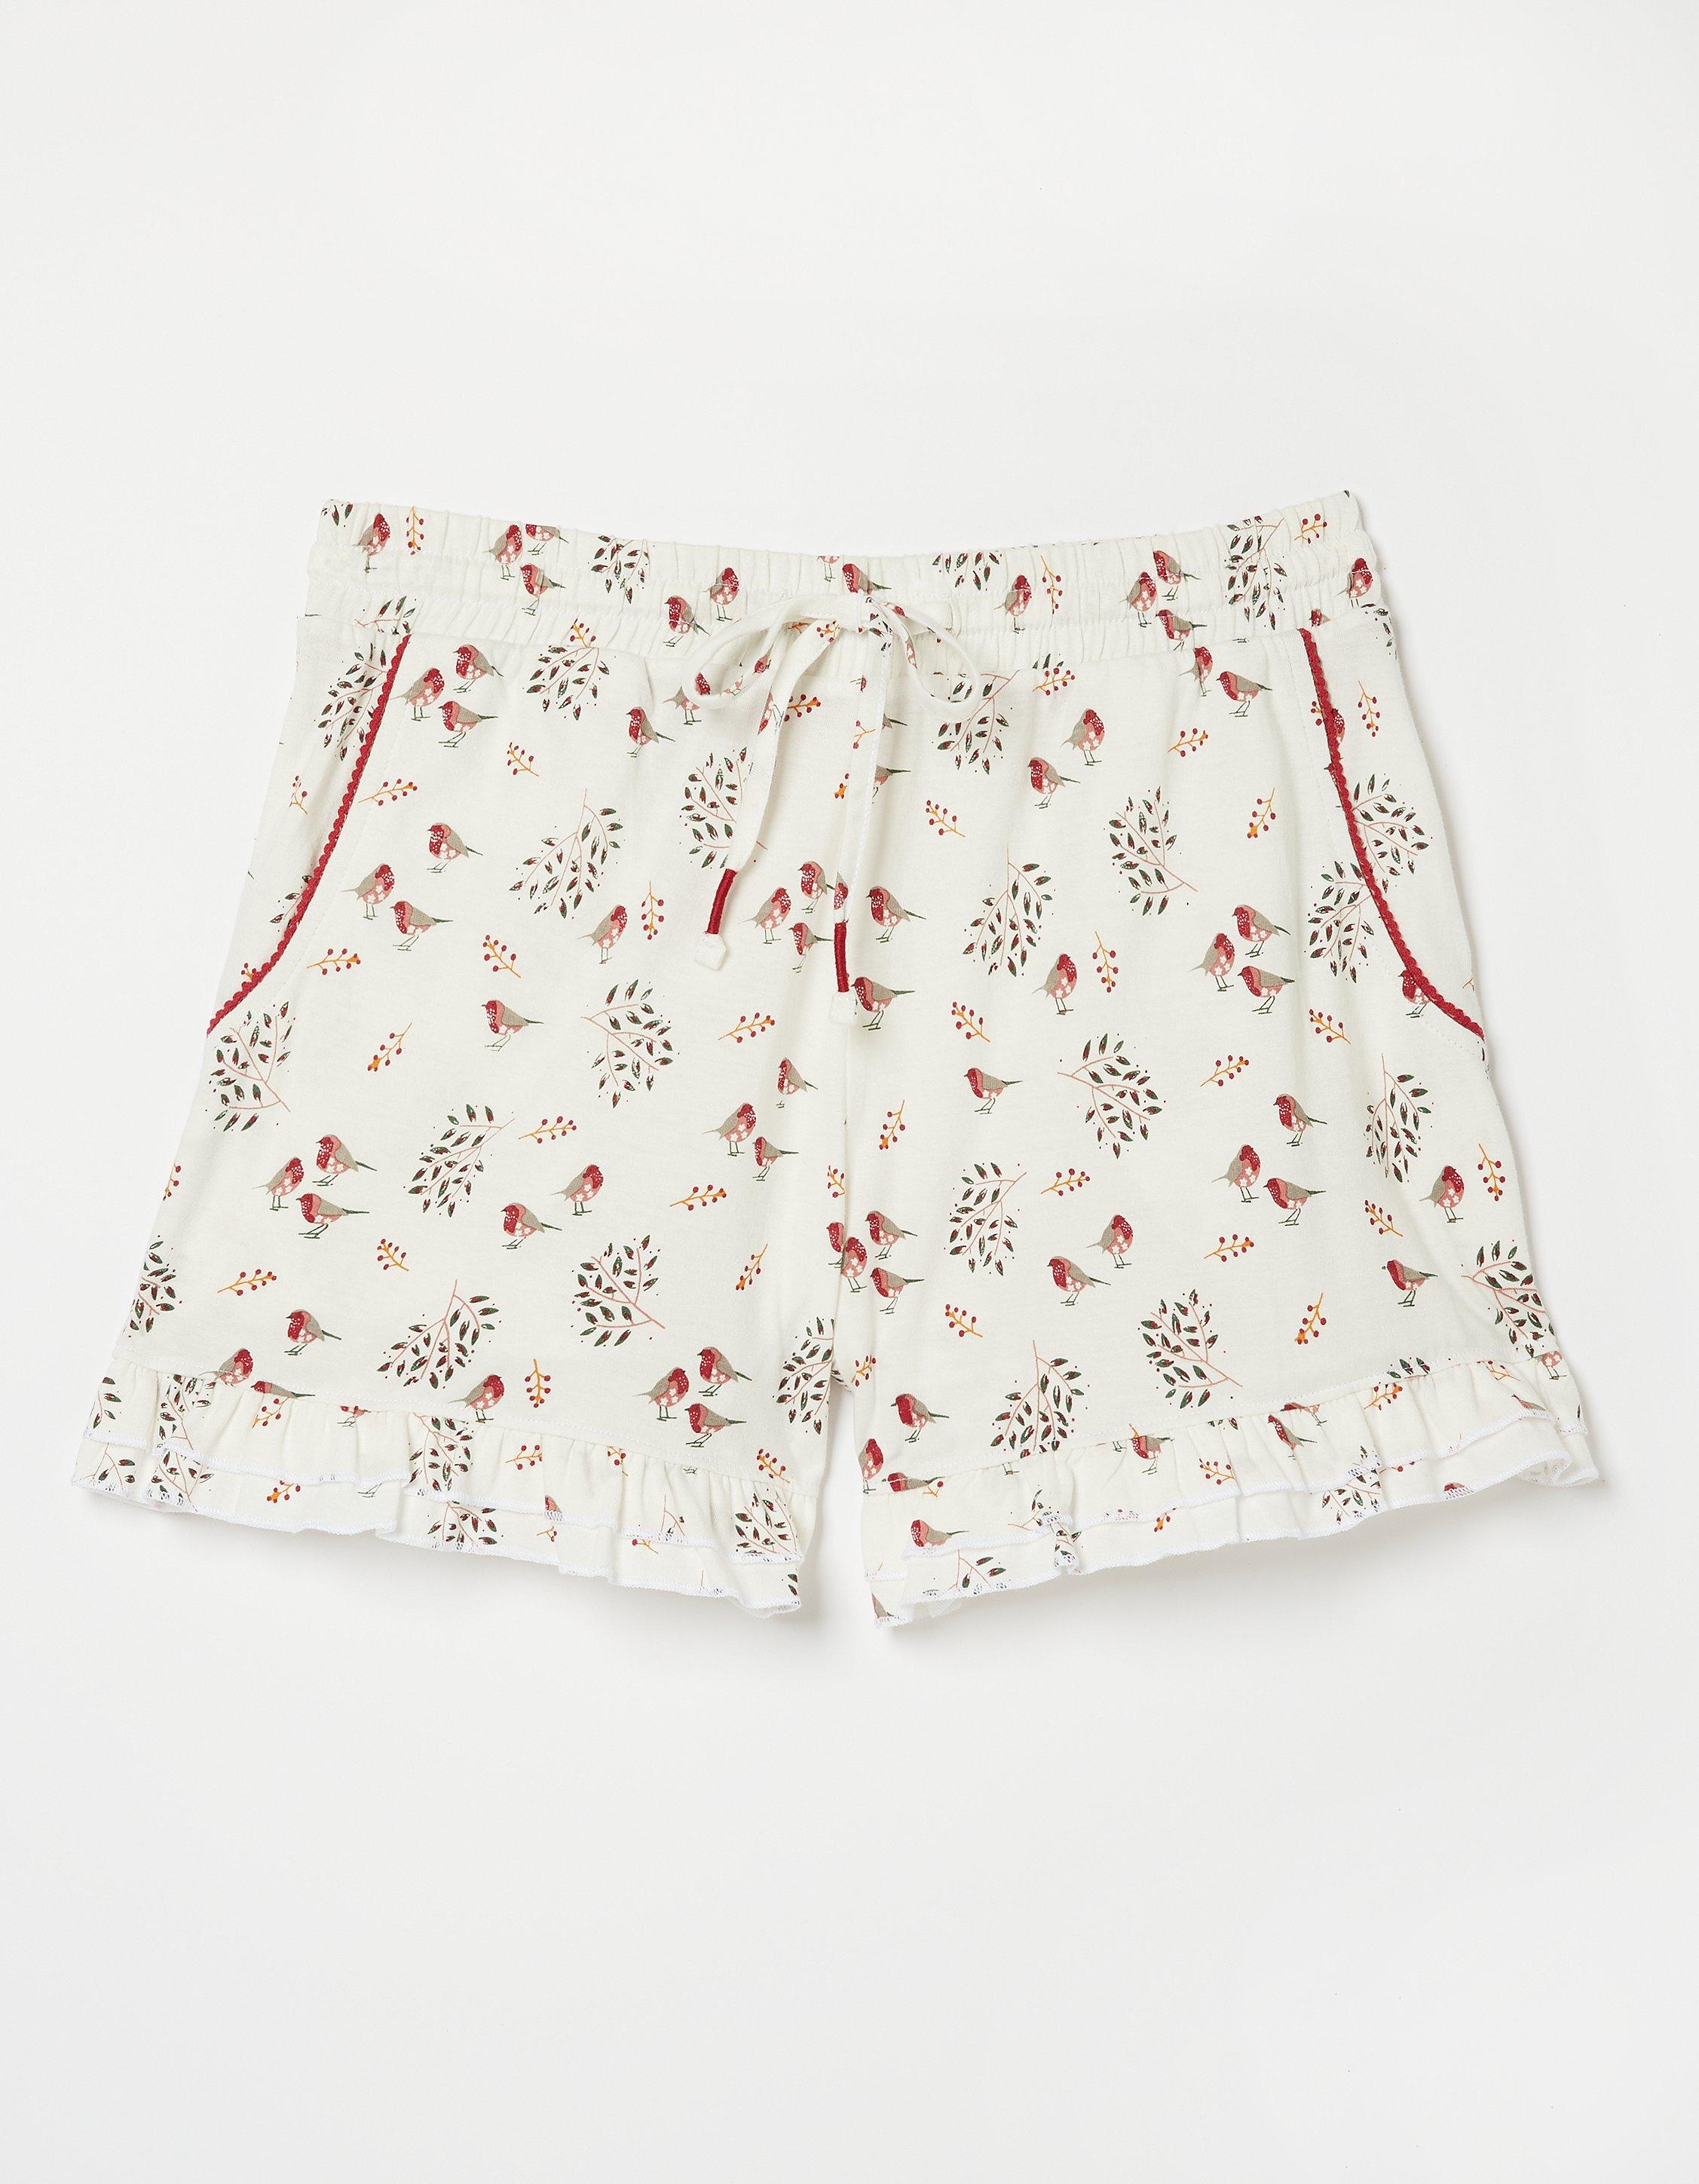 Floral Hollister Shorts - clothing & accessories - by owner